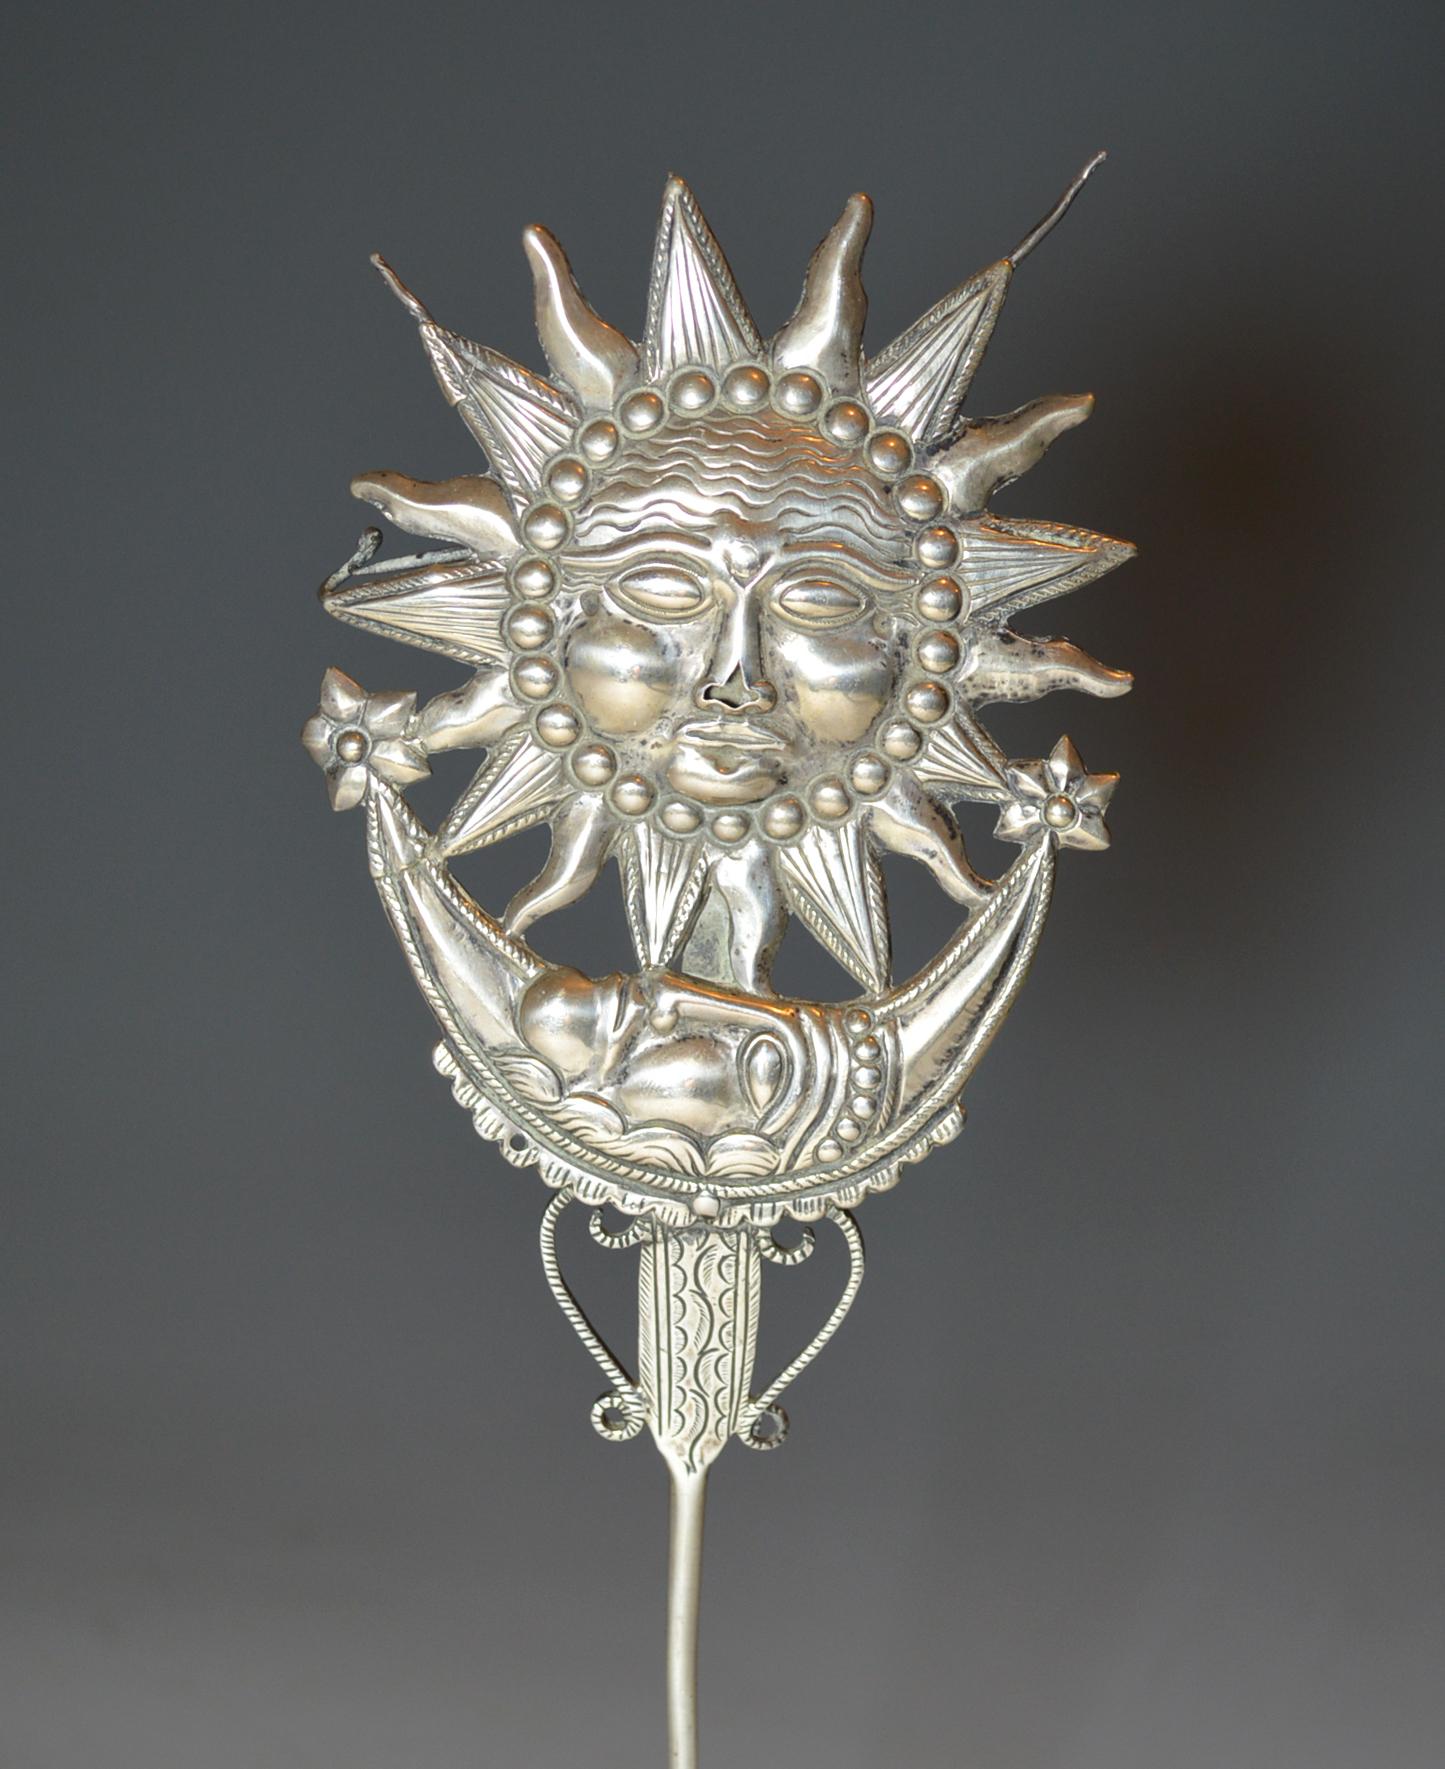 Antique Andean Colonial silver sun moon TUPU 18th-19th century, Bolivia.

A early colonial sun silver moon Tupu.

The Tupu is used for fastening a manta or shawl and comes for Pre Columbian times 

Period Late 18th early-19th century.

Measures: